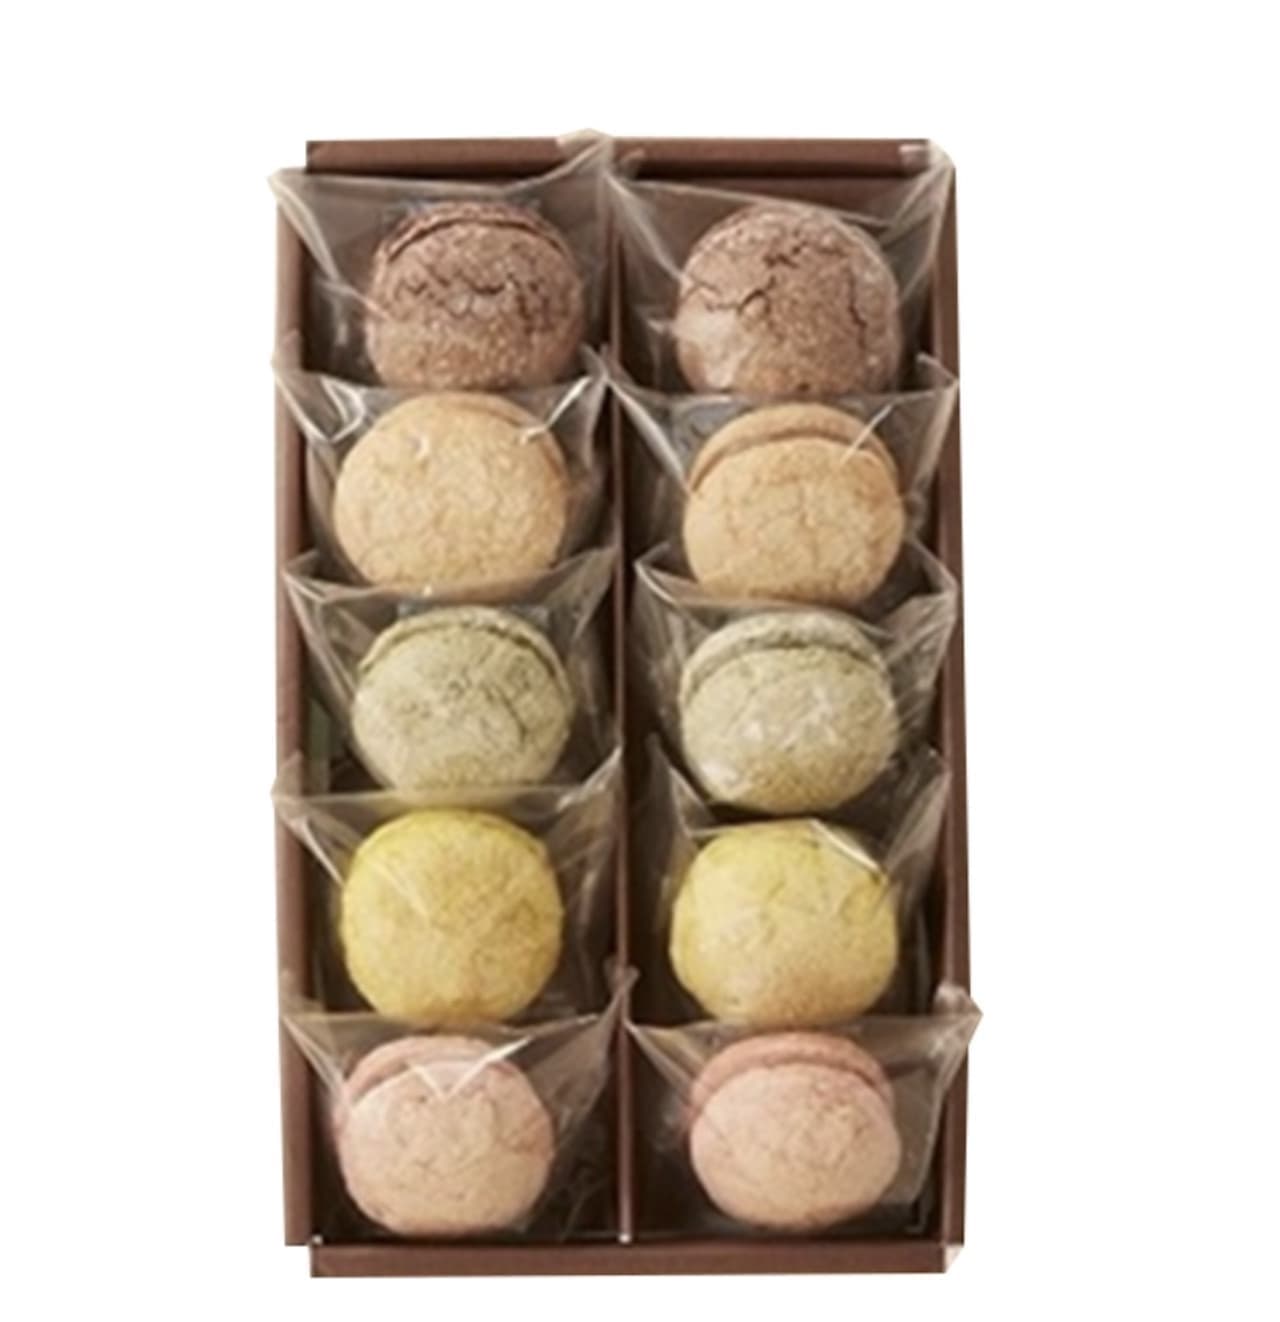 Chateraise new gift "Bonbon macarons 10 pieces".